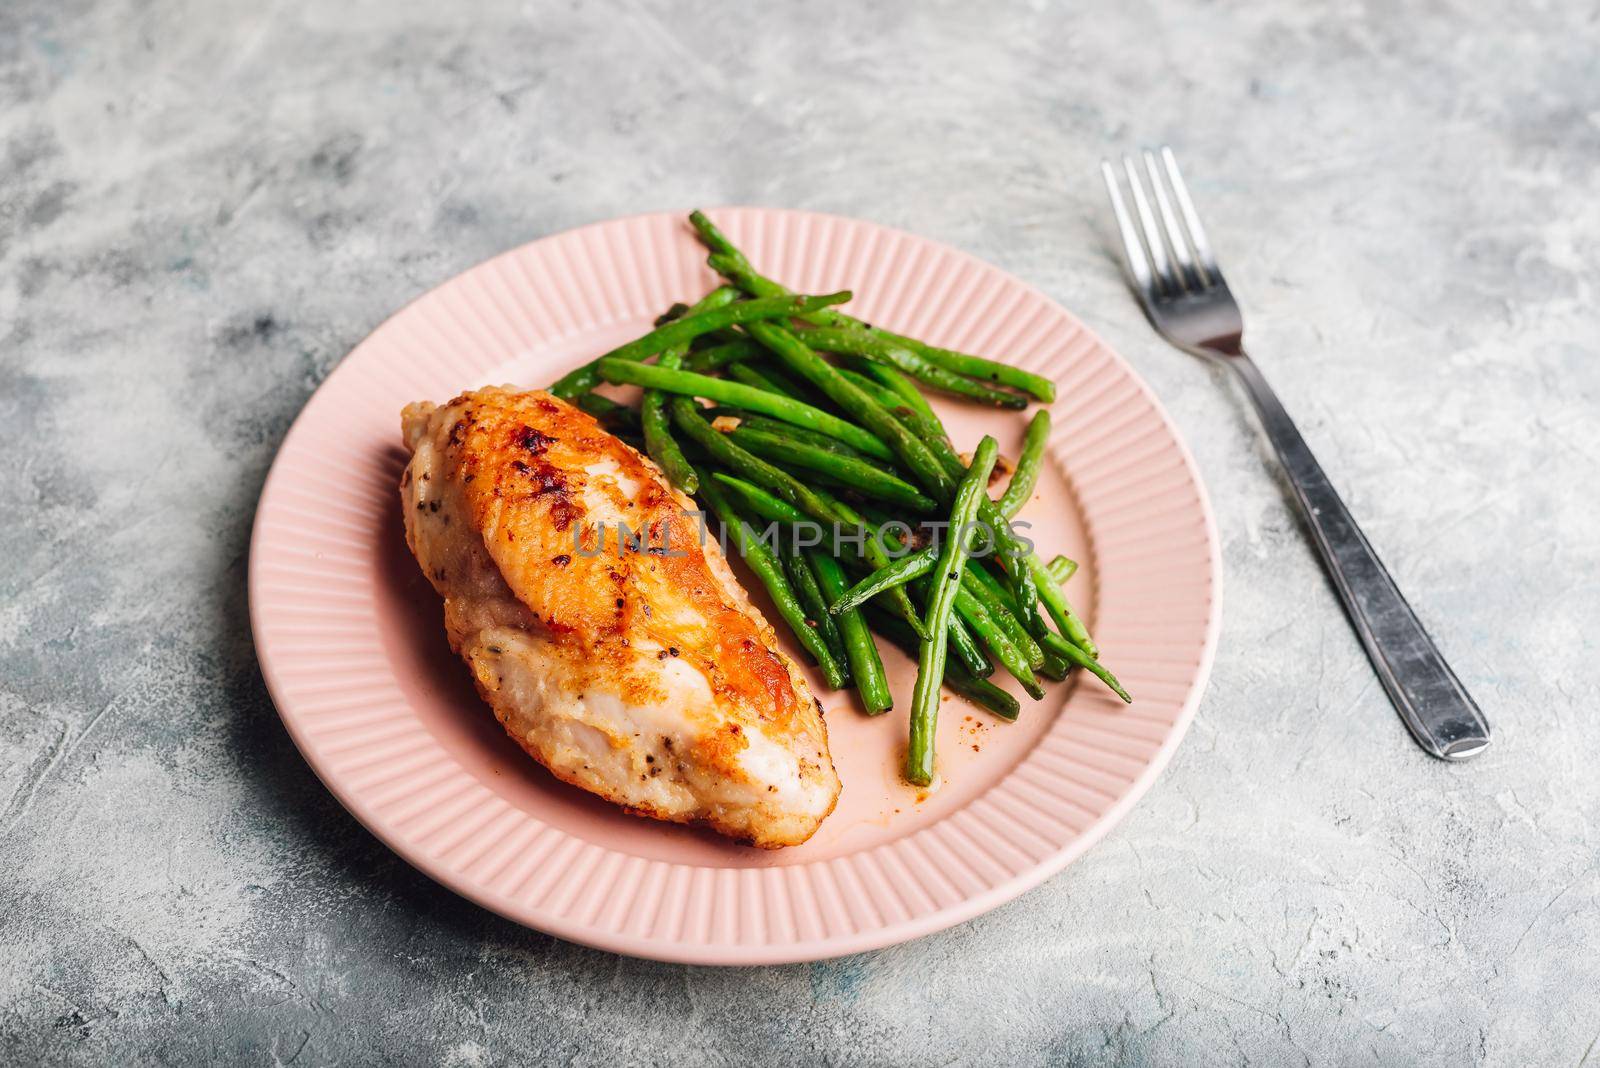 Crispy Oven-baked Chicken Breast Served on Plate with Green Beans Fried with Garlic and Thyme